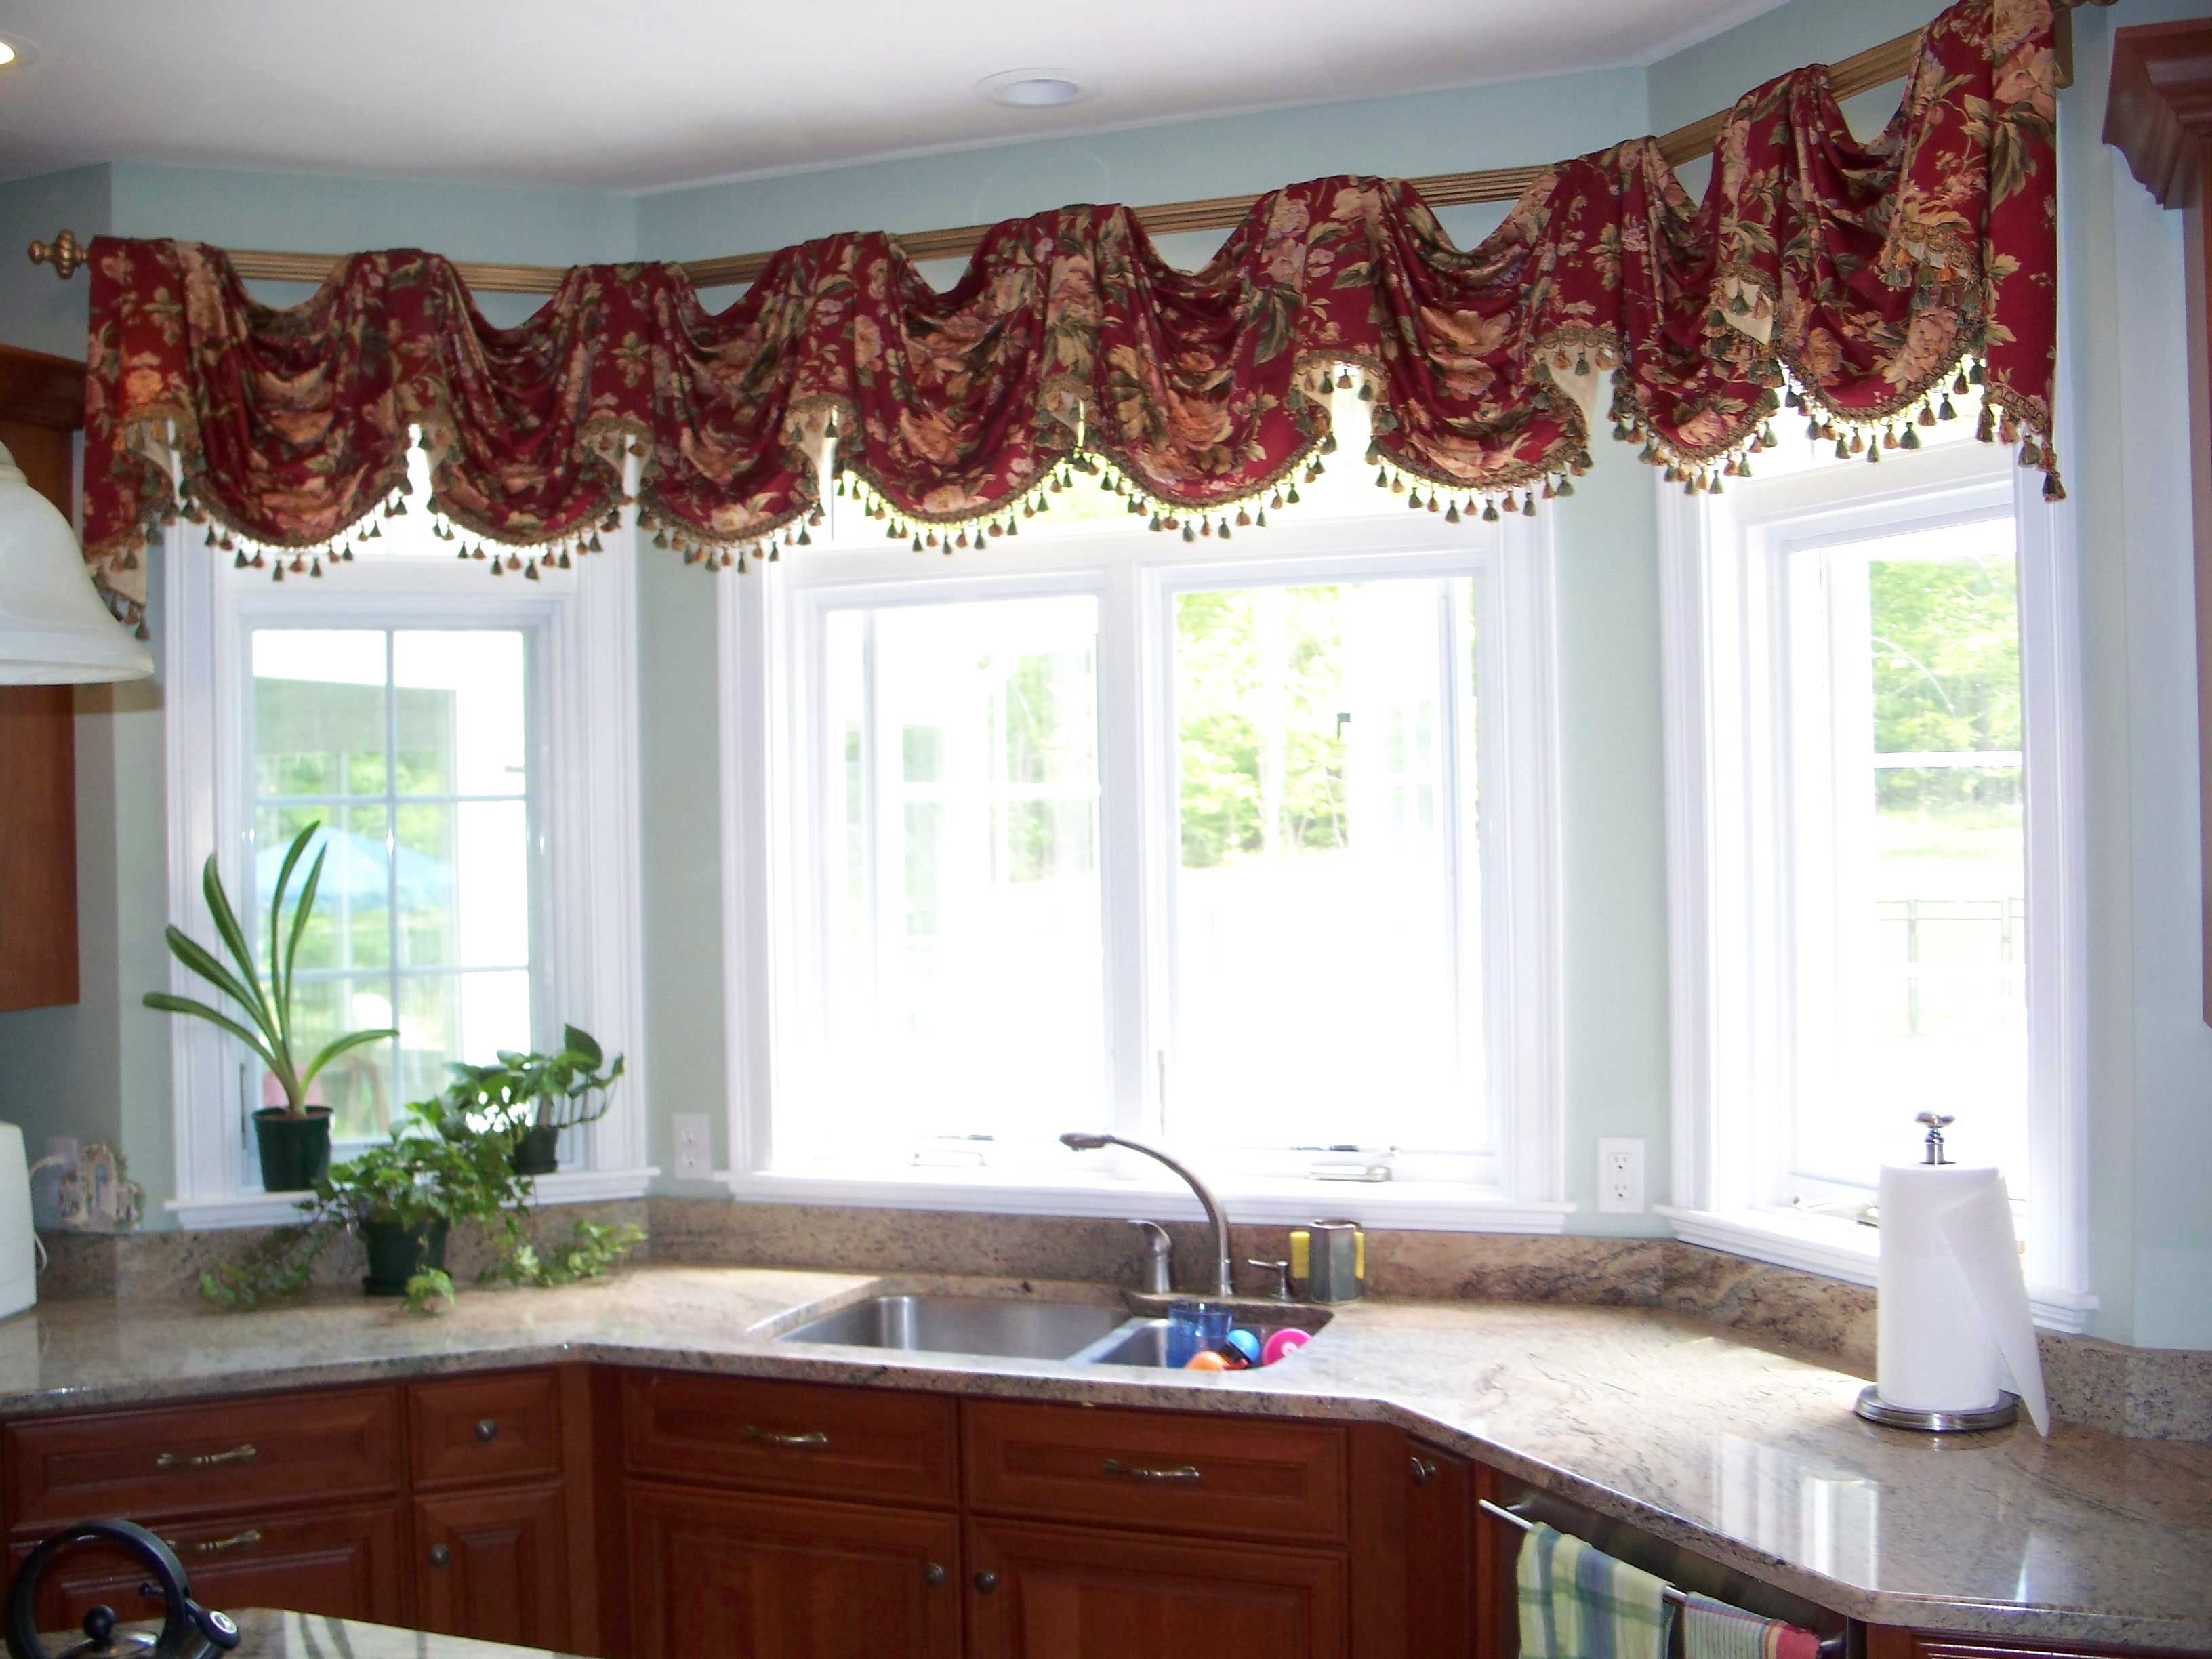 Plants Decor Window Fresh Plants Decor Closed Tile Window Used Elegant Kitchen Curtain Ideas And Double Sink On Nice Countertop Pattern Closed Wooden Cabinet Kitchen Guide To Choose The Appropriate Kitchen Curtain Ideas